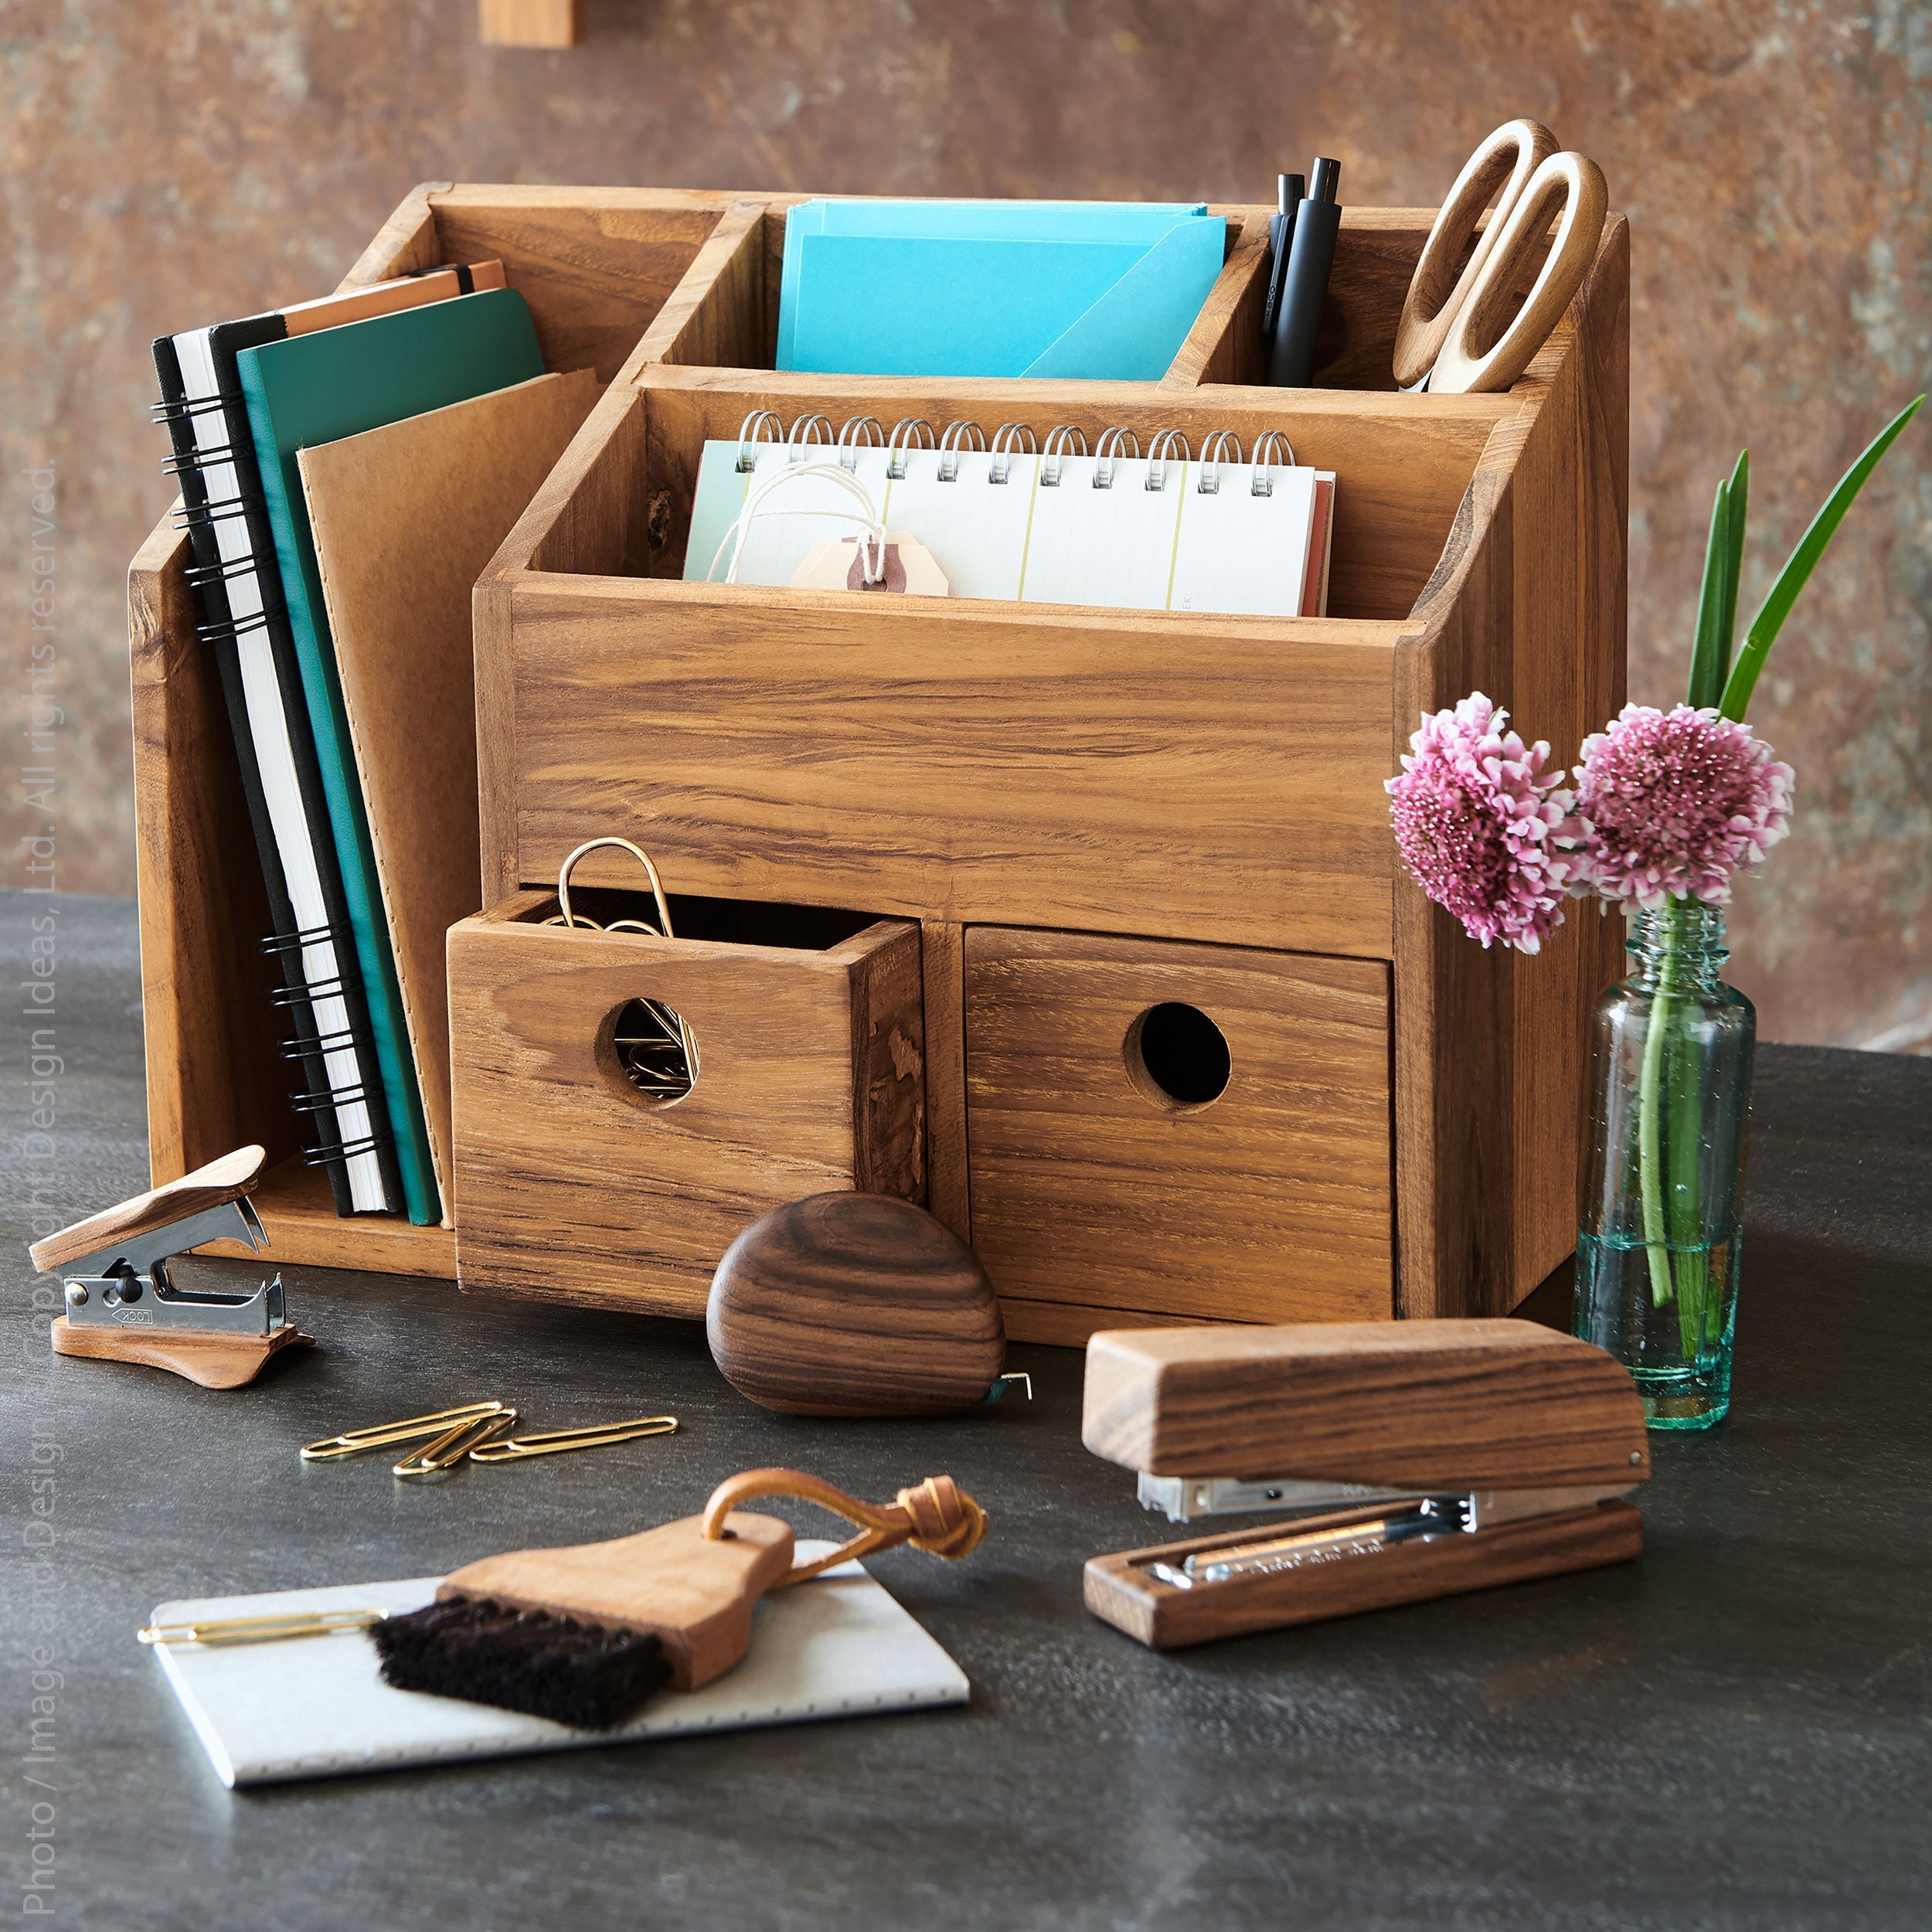 Takara Teak Organizer   | Image 2 | From the Takara Collection | Masterfully constructed with solid teak for long lasting use | This organizer is sustainably sourced | Available in clear color | texxture home